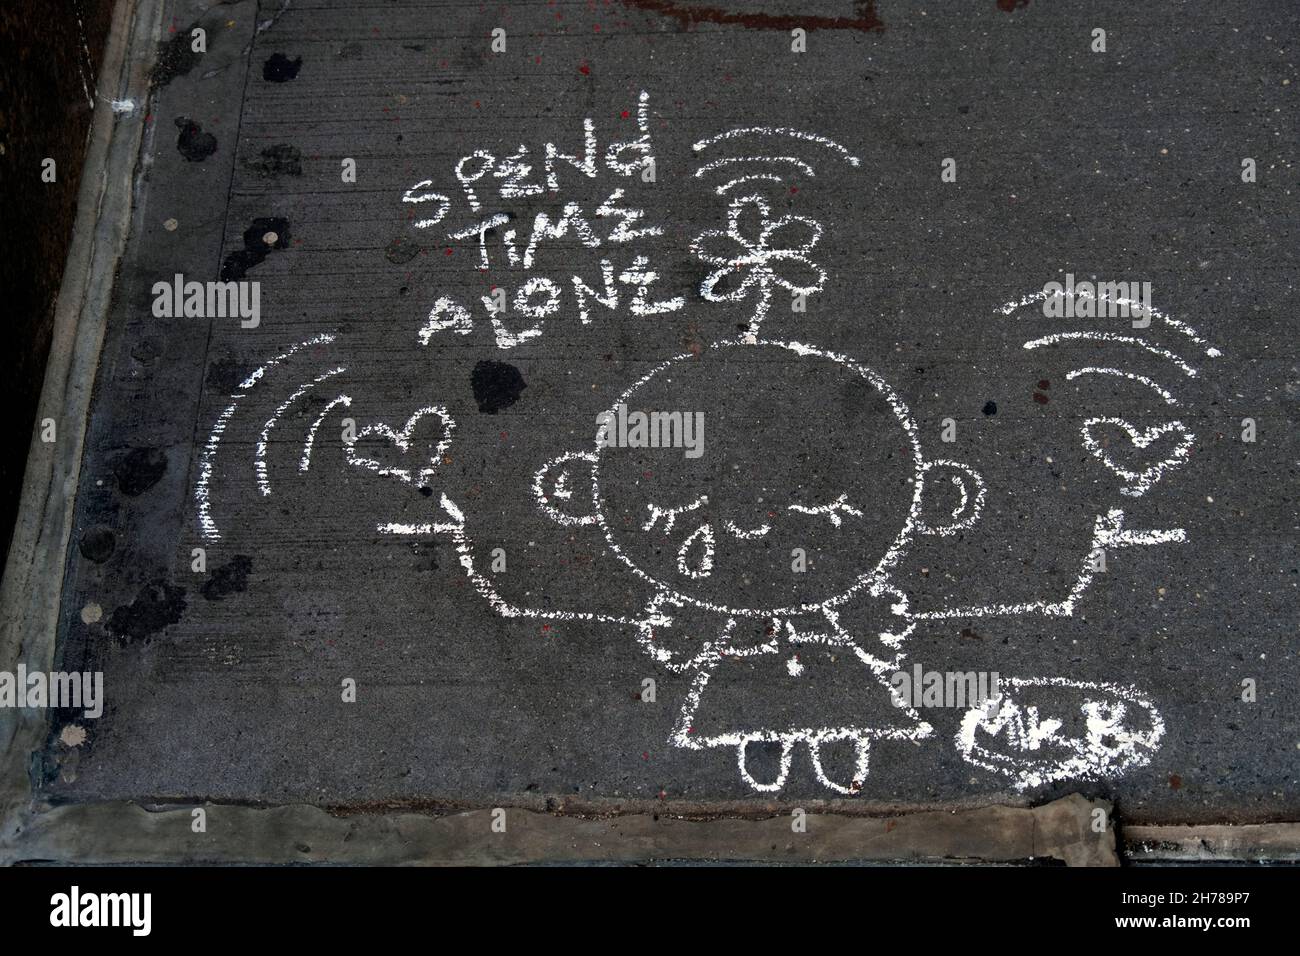 A chalk drawing on a sidewalk in Greenwich Village suggesting we spend time alone. In New York City. Stock Photo